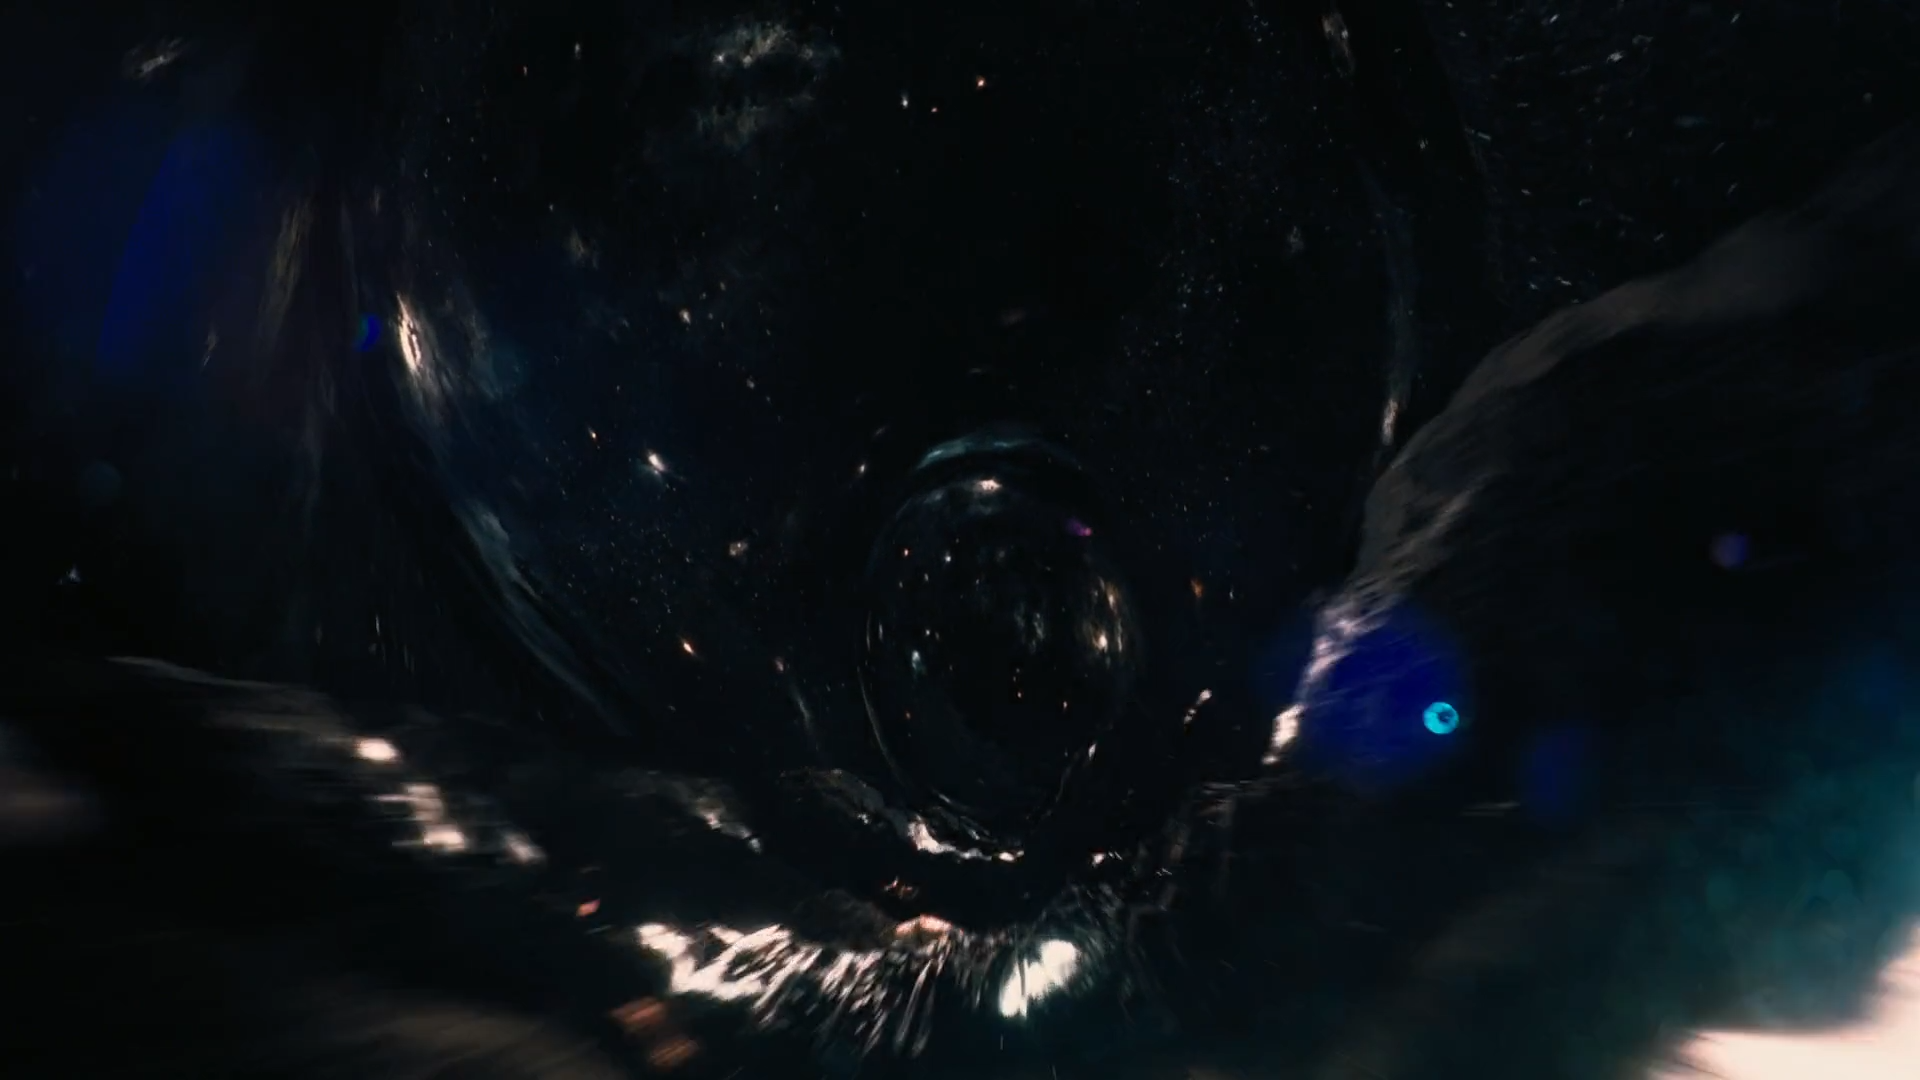 Space Wormhole 3D Screensaver & Live Wallpaper - YouTube